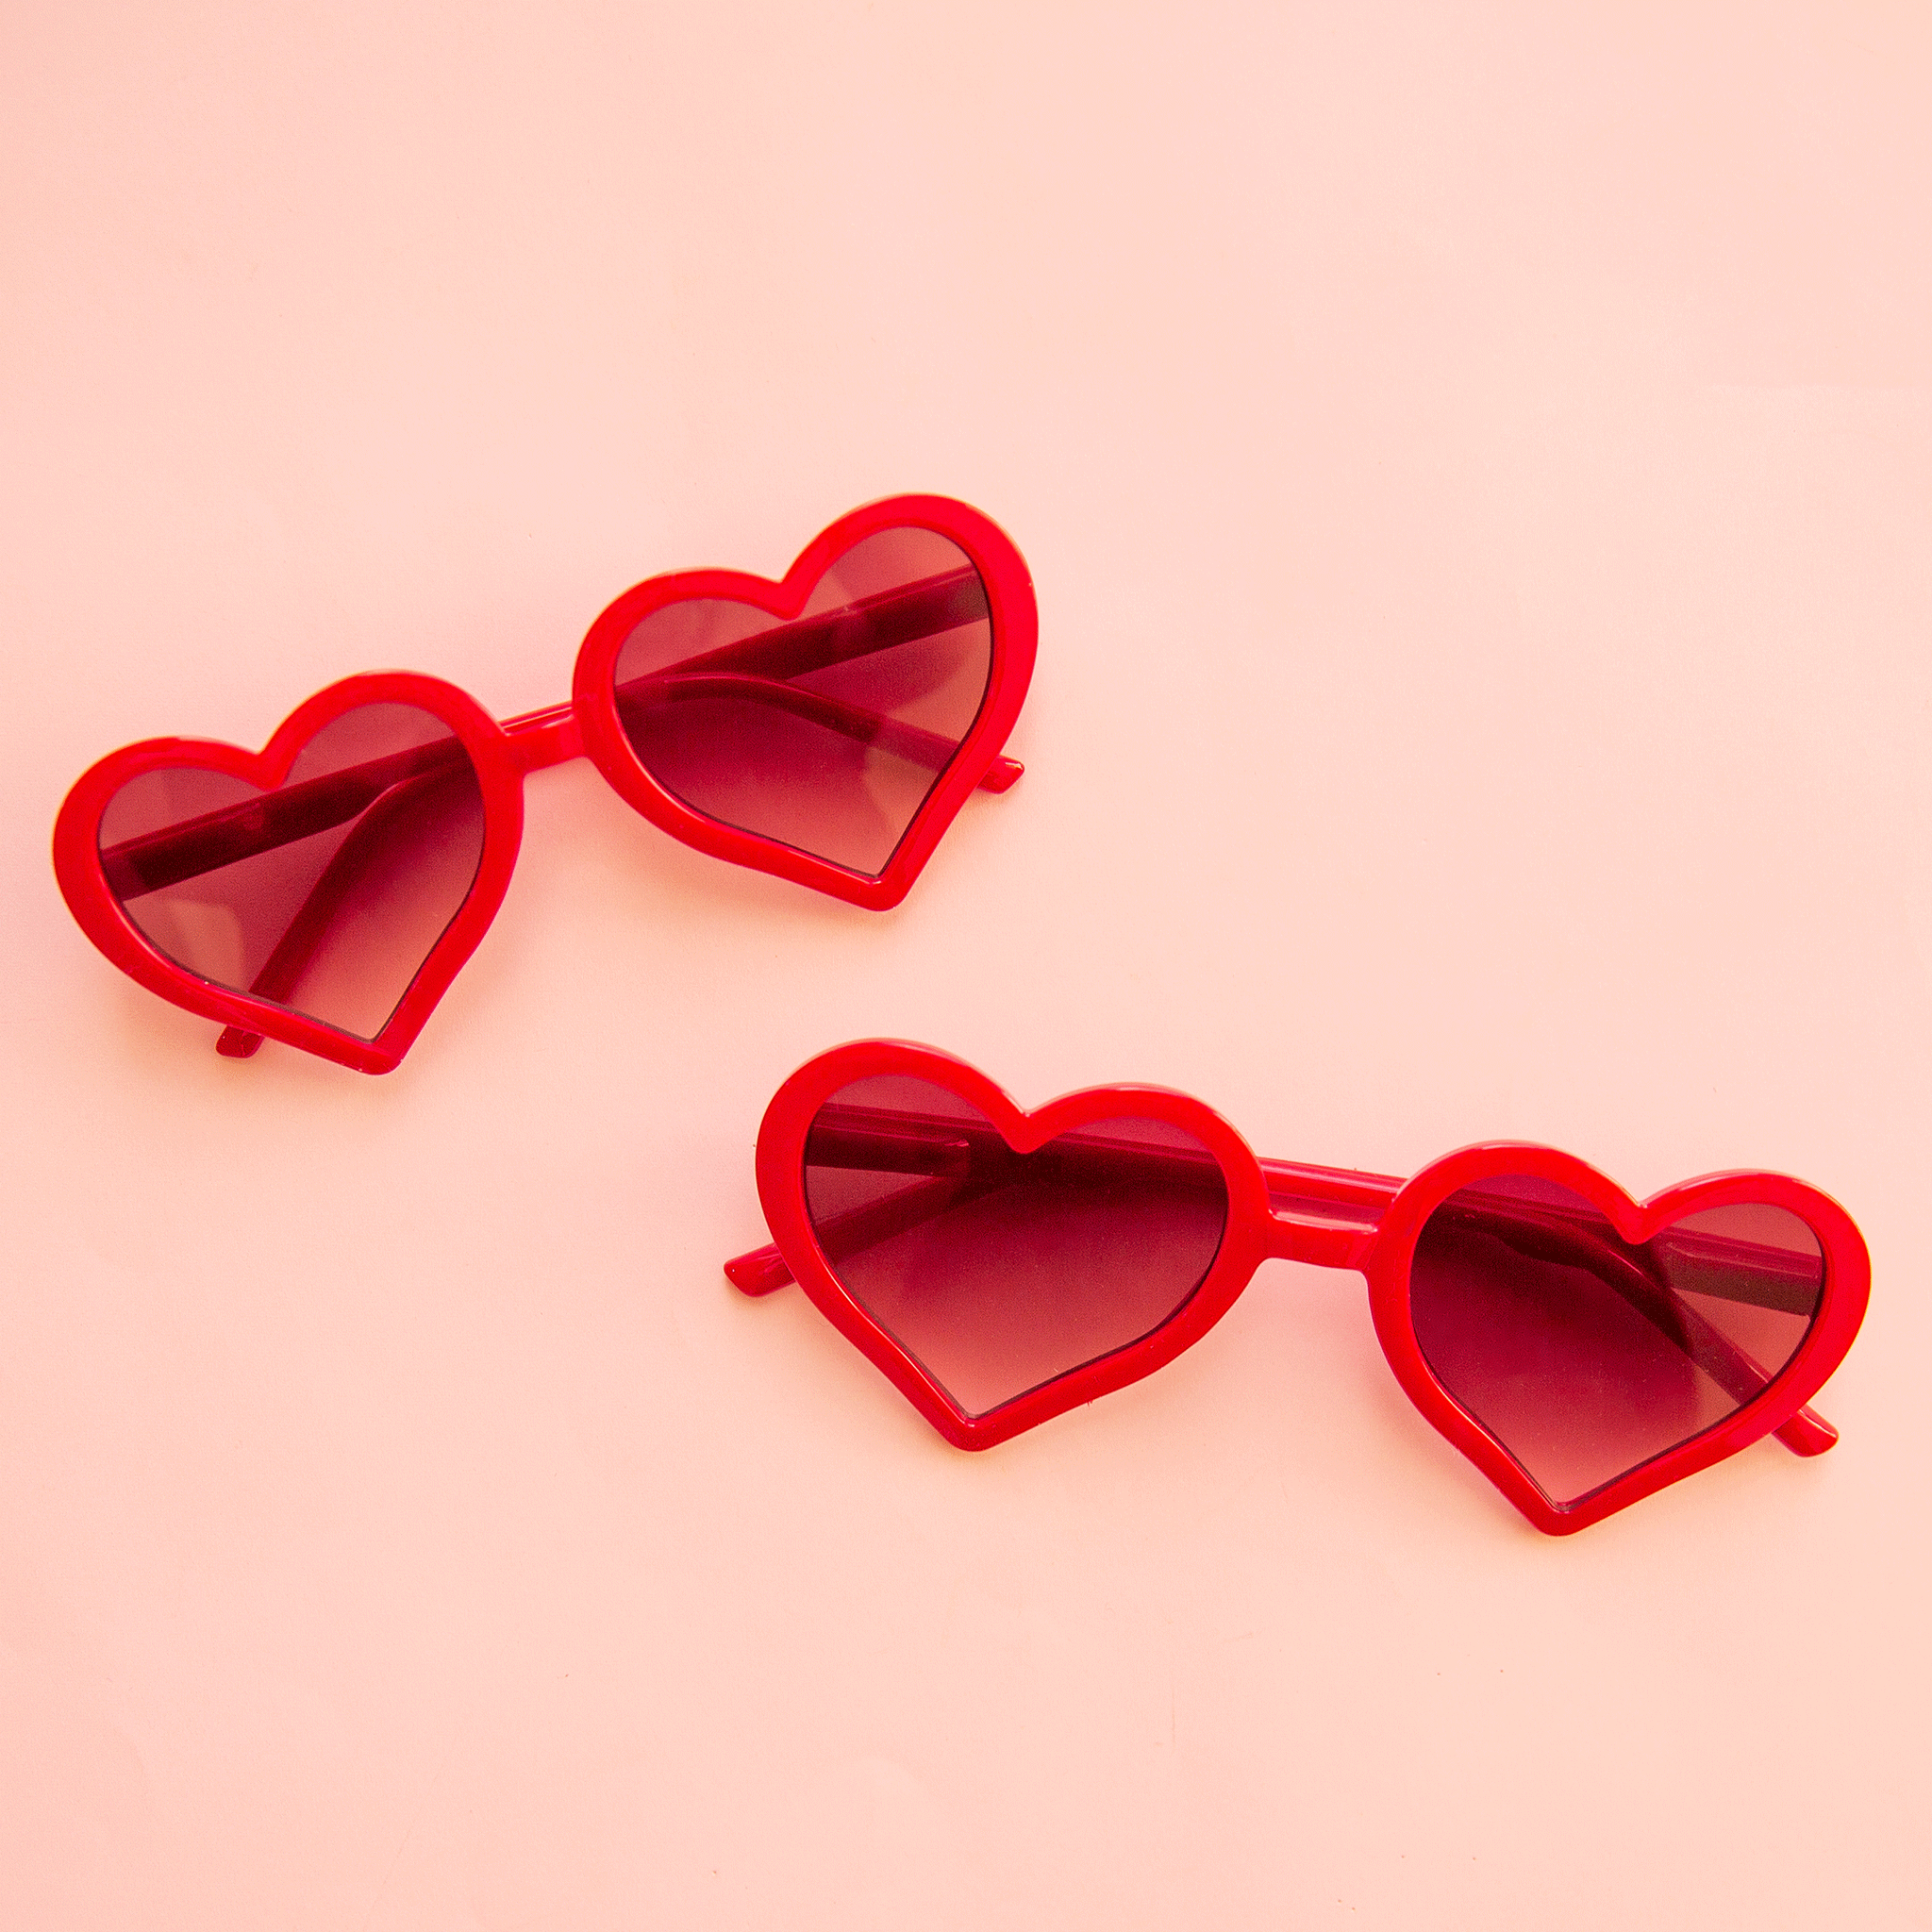 On a pink background is a red pair of heart shaped sunglasses in two different sizes, one for kids and one for adults.